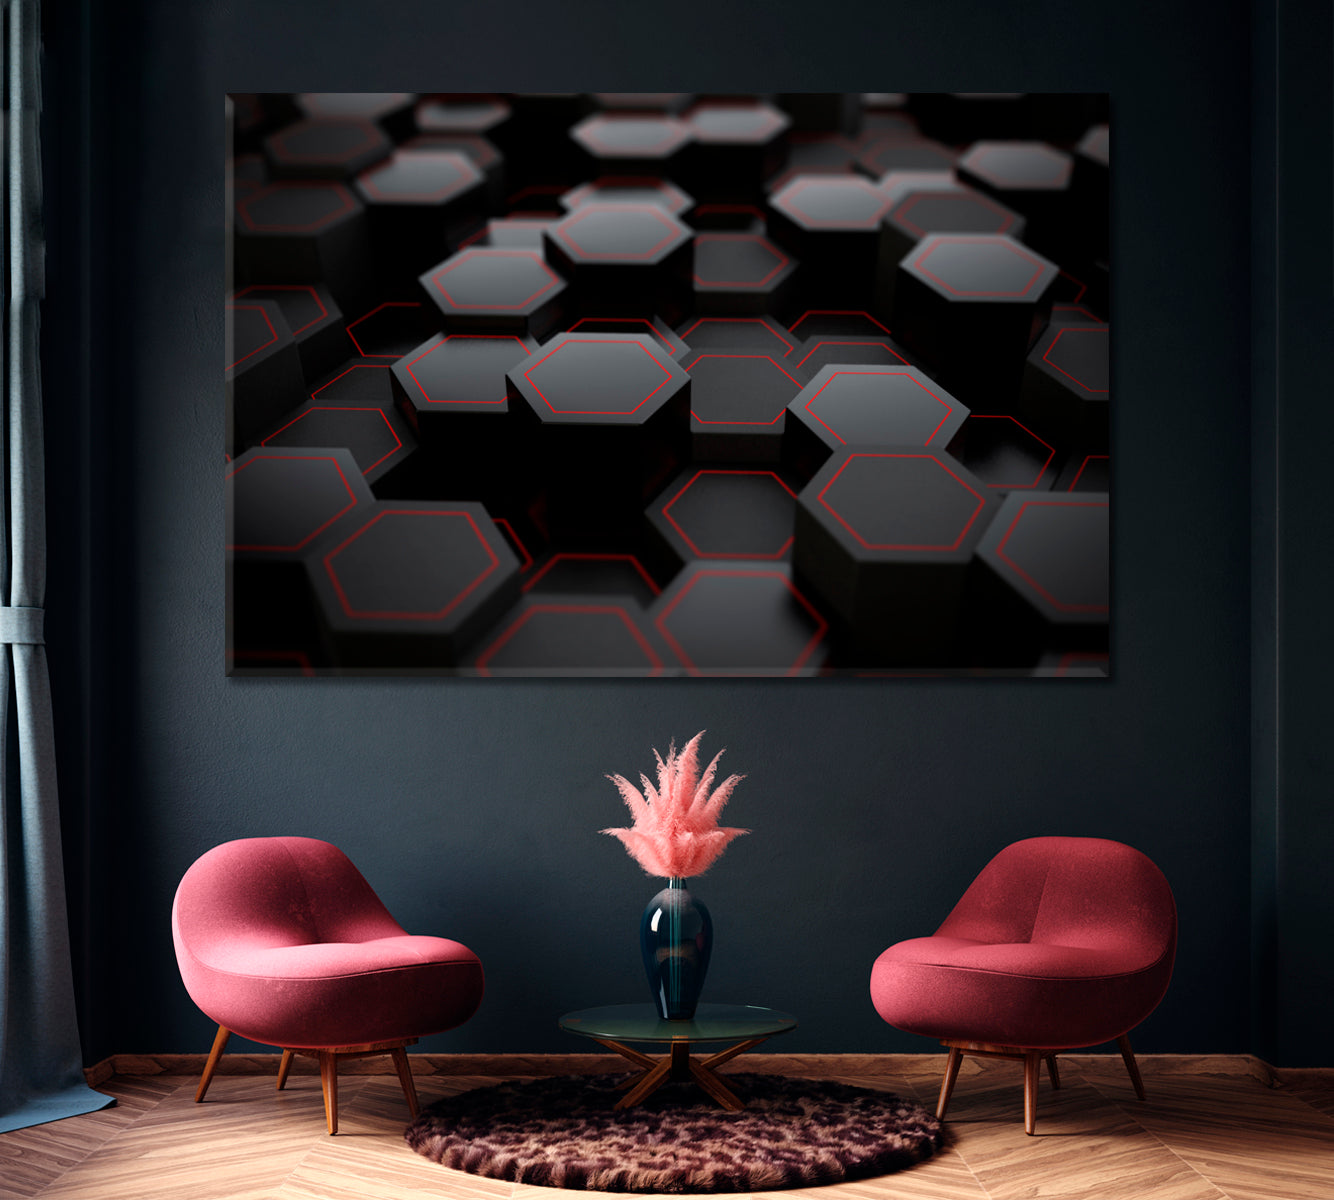 Abstract Black Hexagons Canvas Print ArtLexy 1 Panel 24"x16" inches 